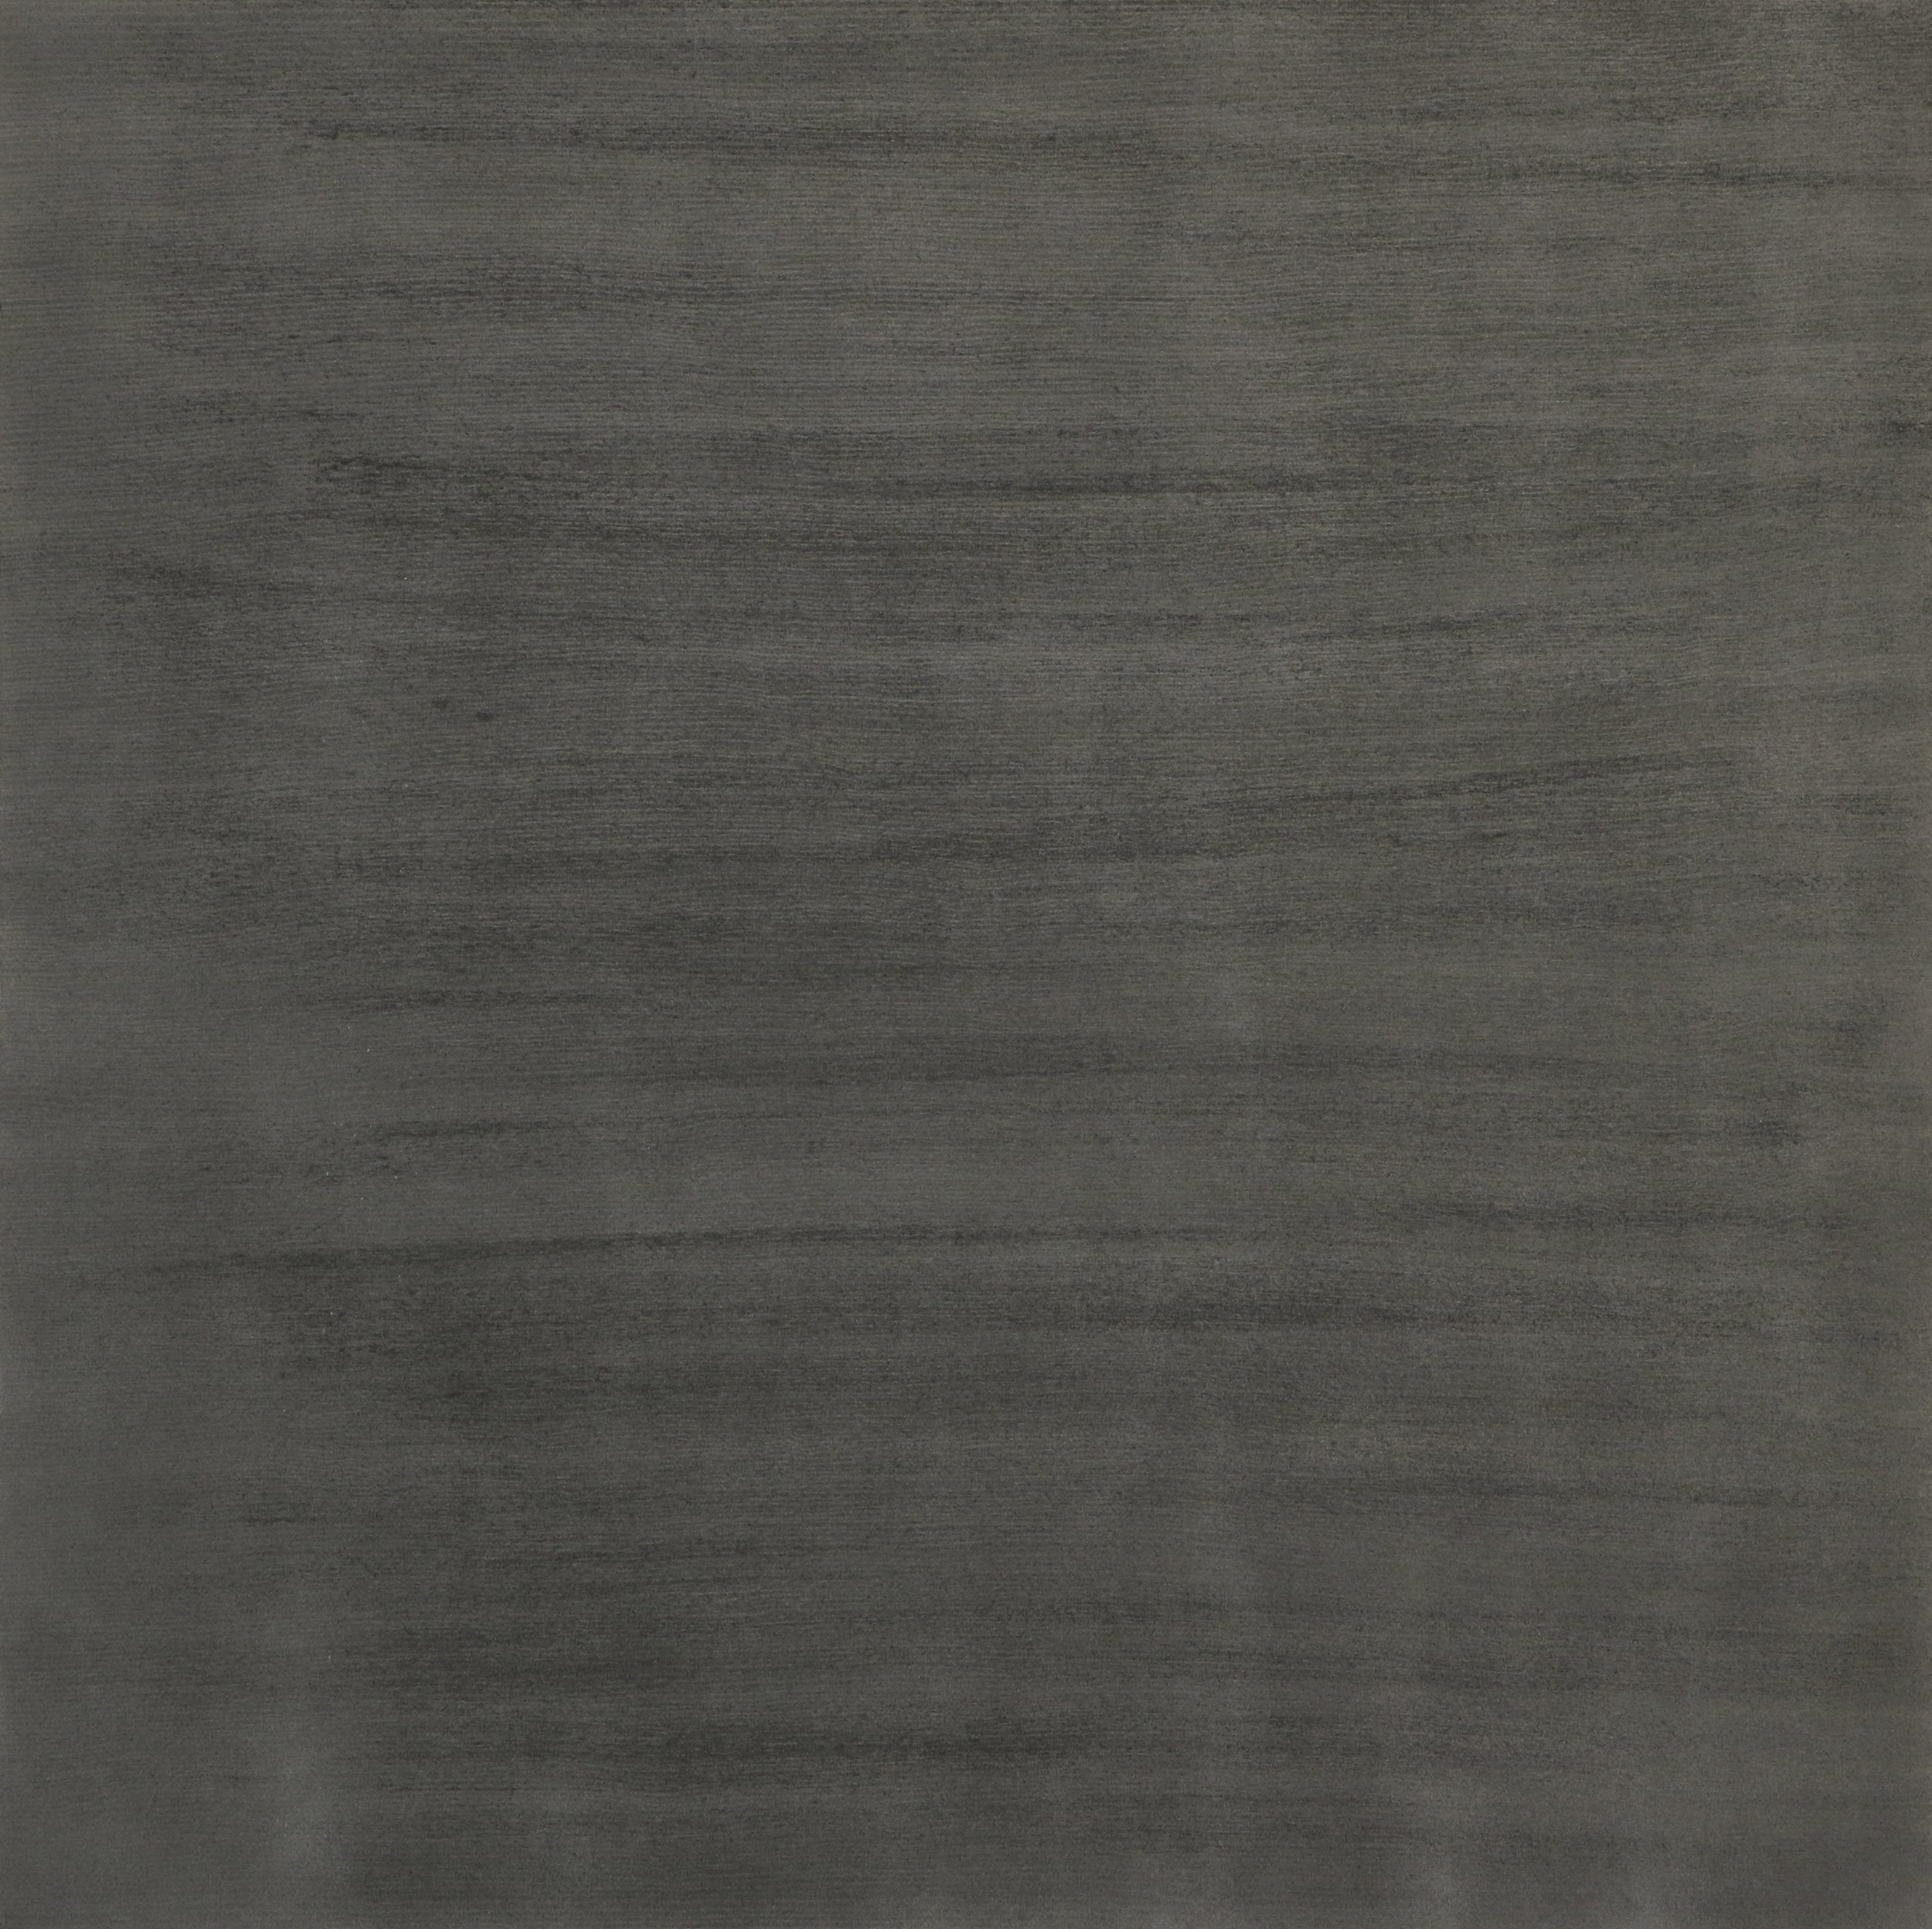    Slate  , graphite on Rives BFK paper mounted on wood panel, 36 x 36 inches, 2017 